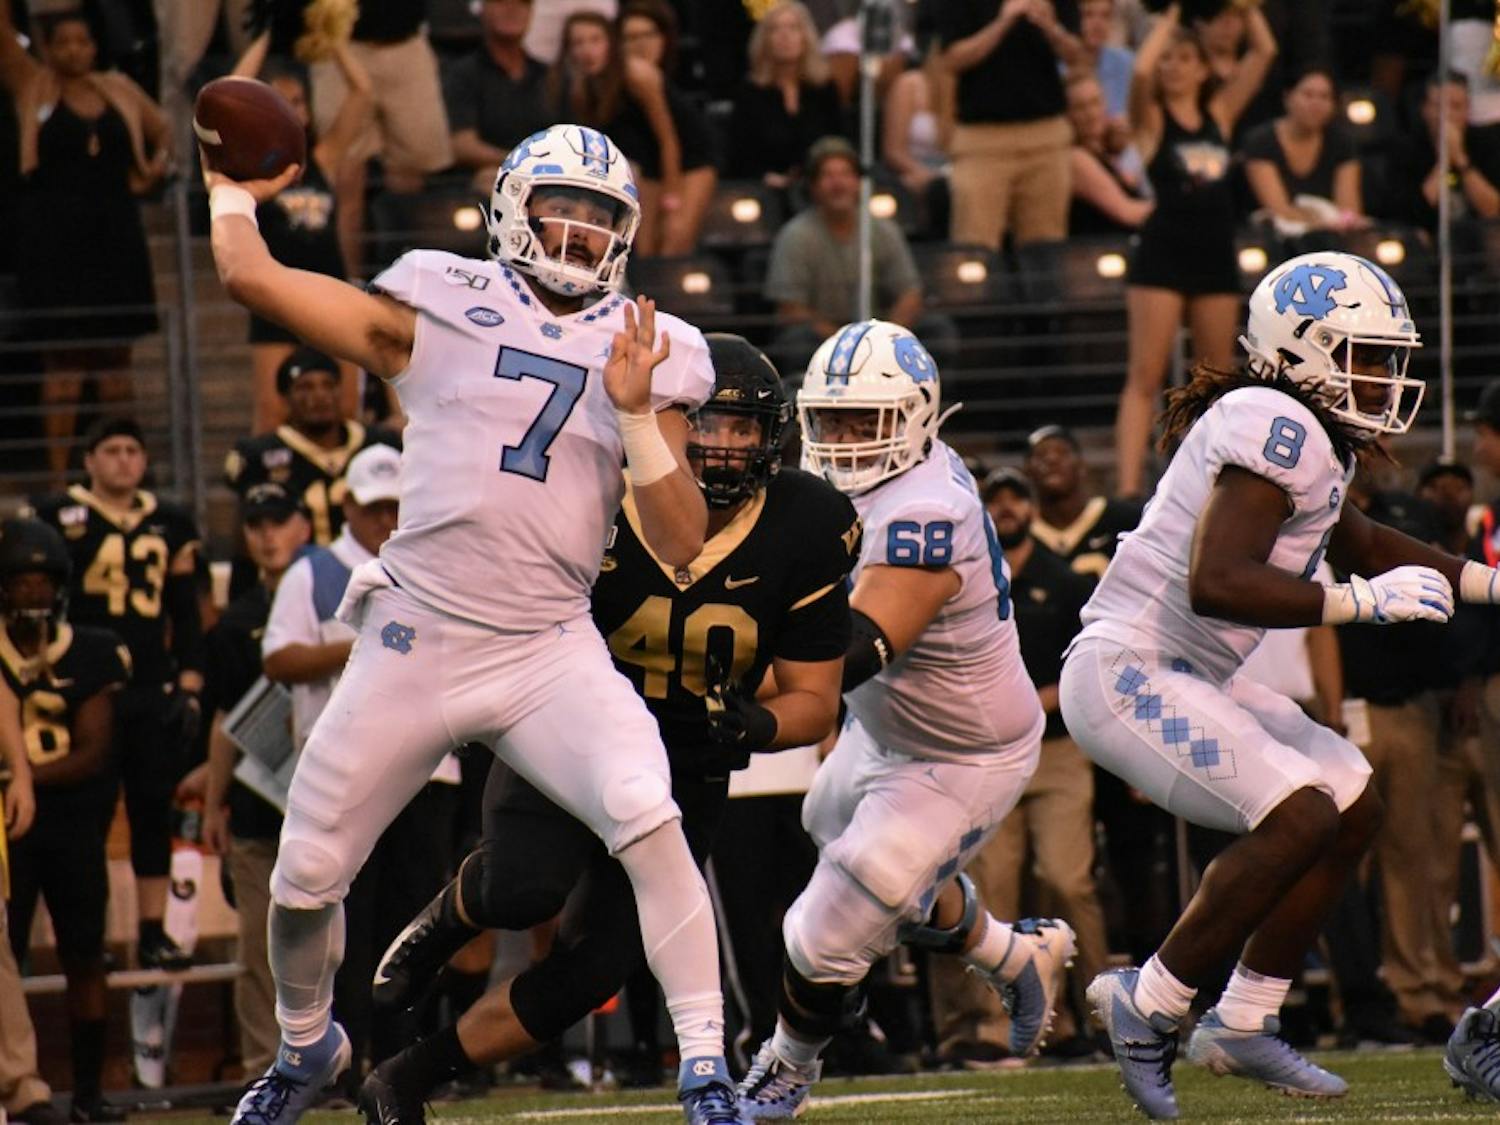 UNC-CH first-year quarterback Sam Howell (#7) winds up a throw to one of his teammates as the Wake Forest defense closes in. 